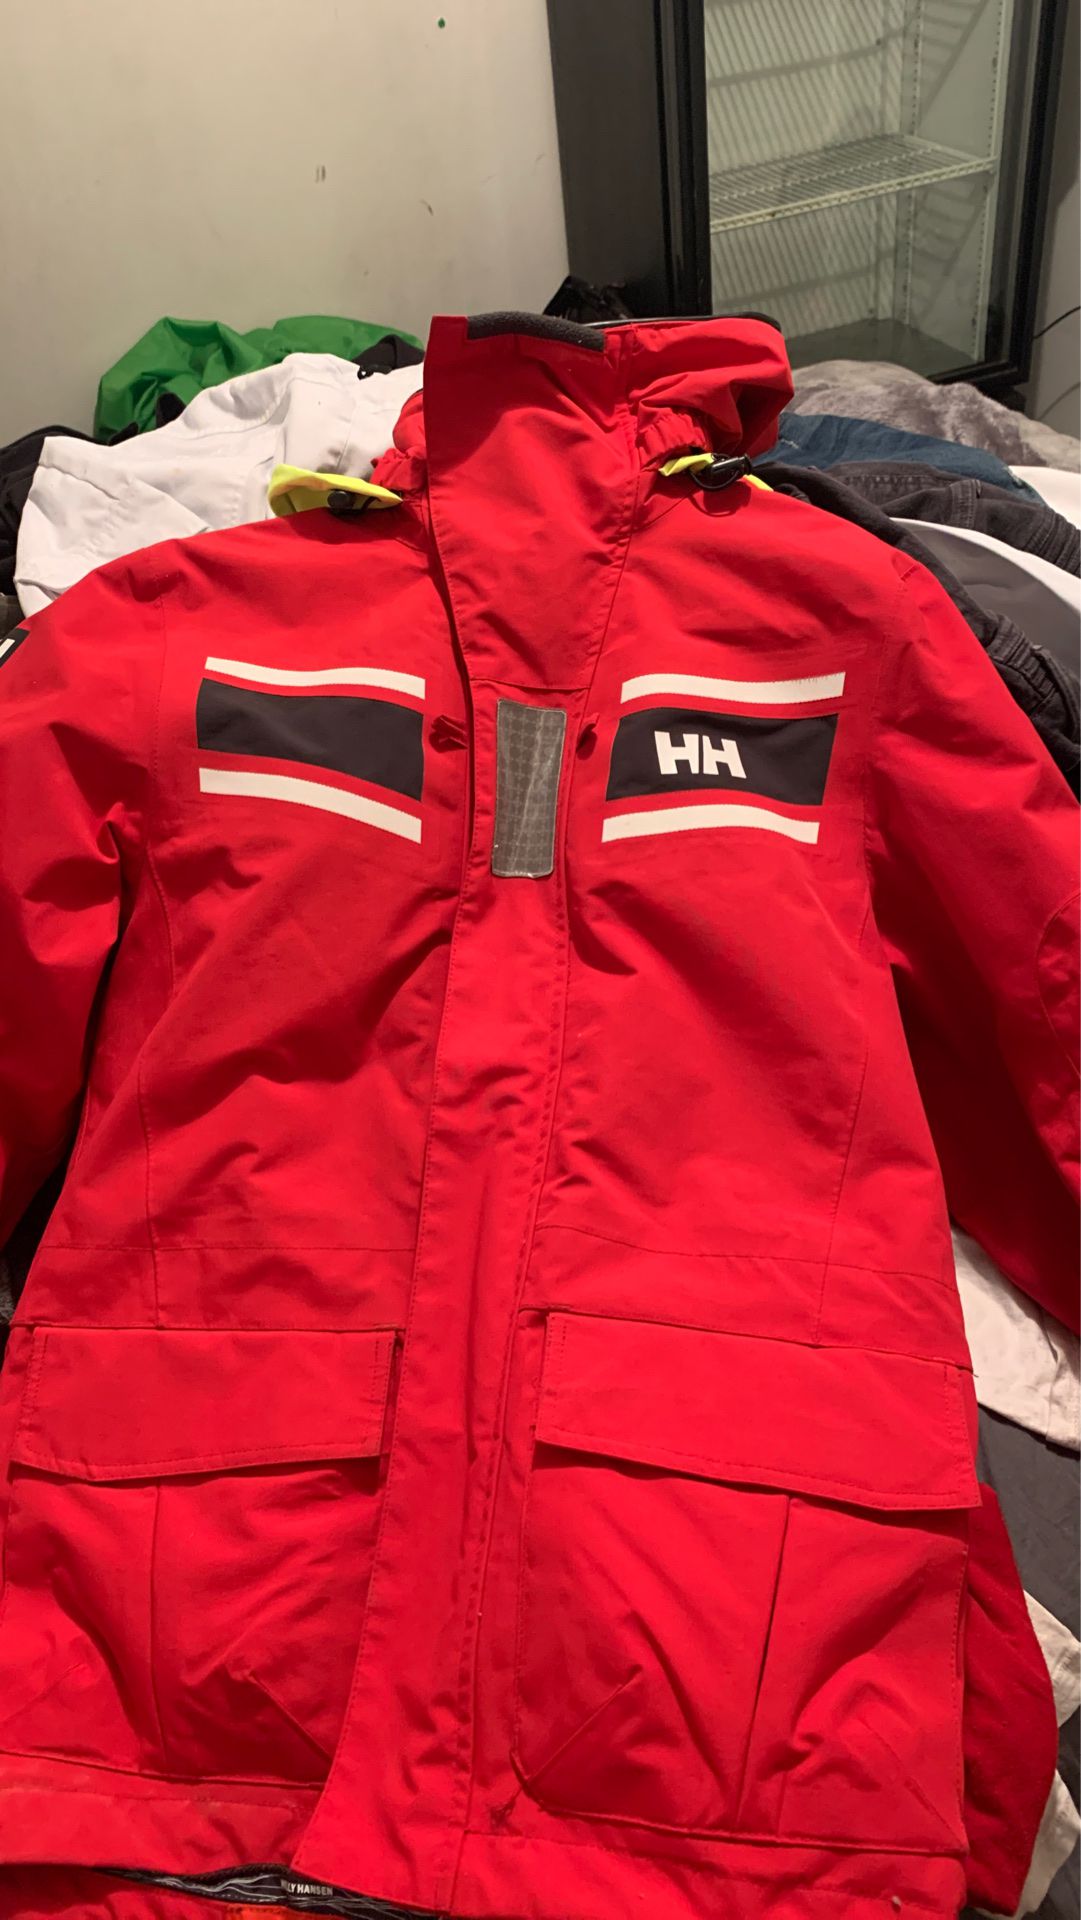 Helly Henson size SMALL $75